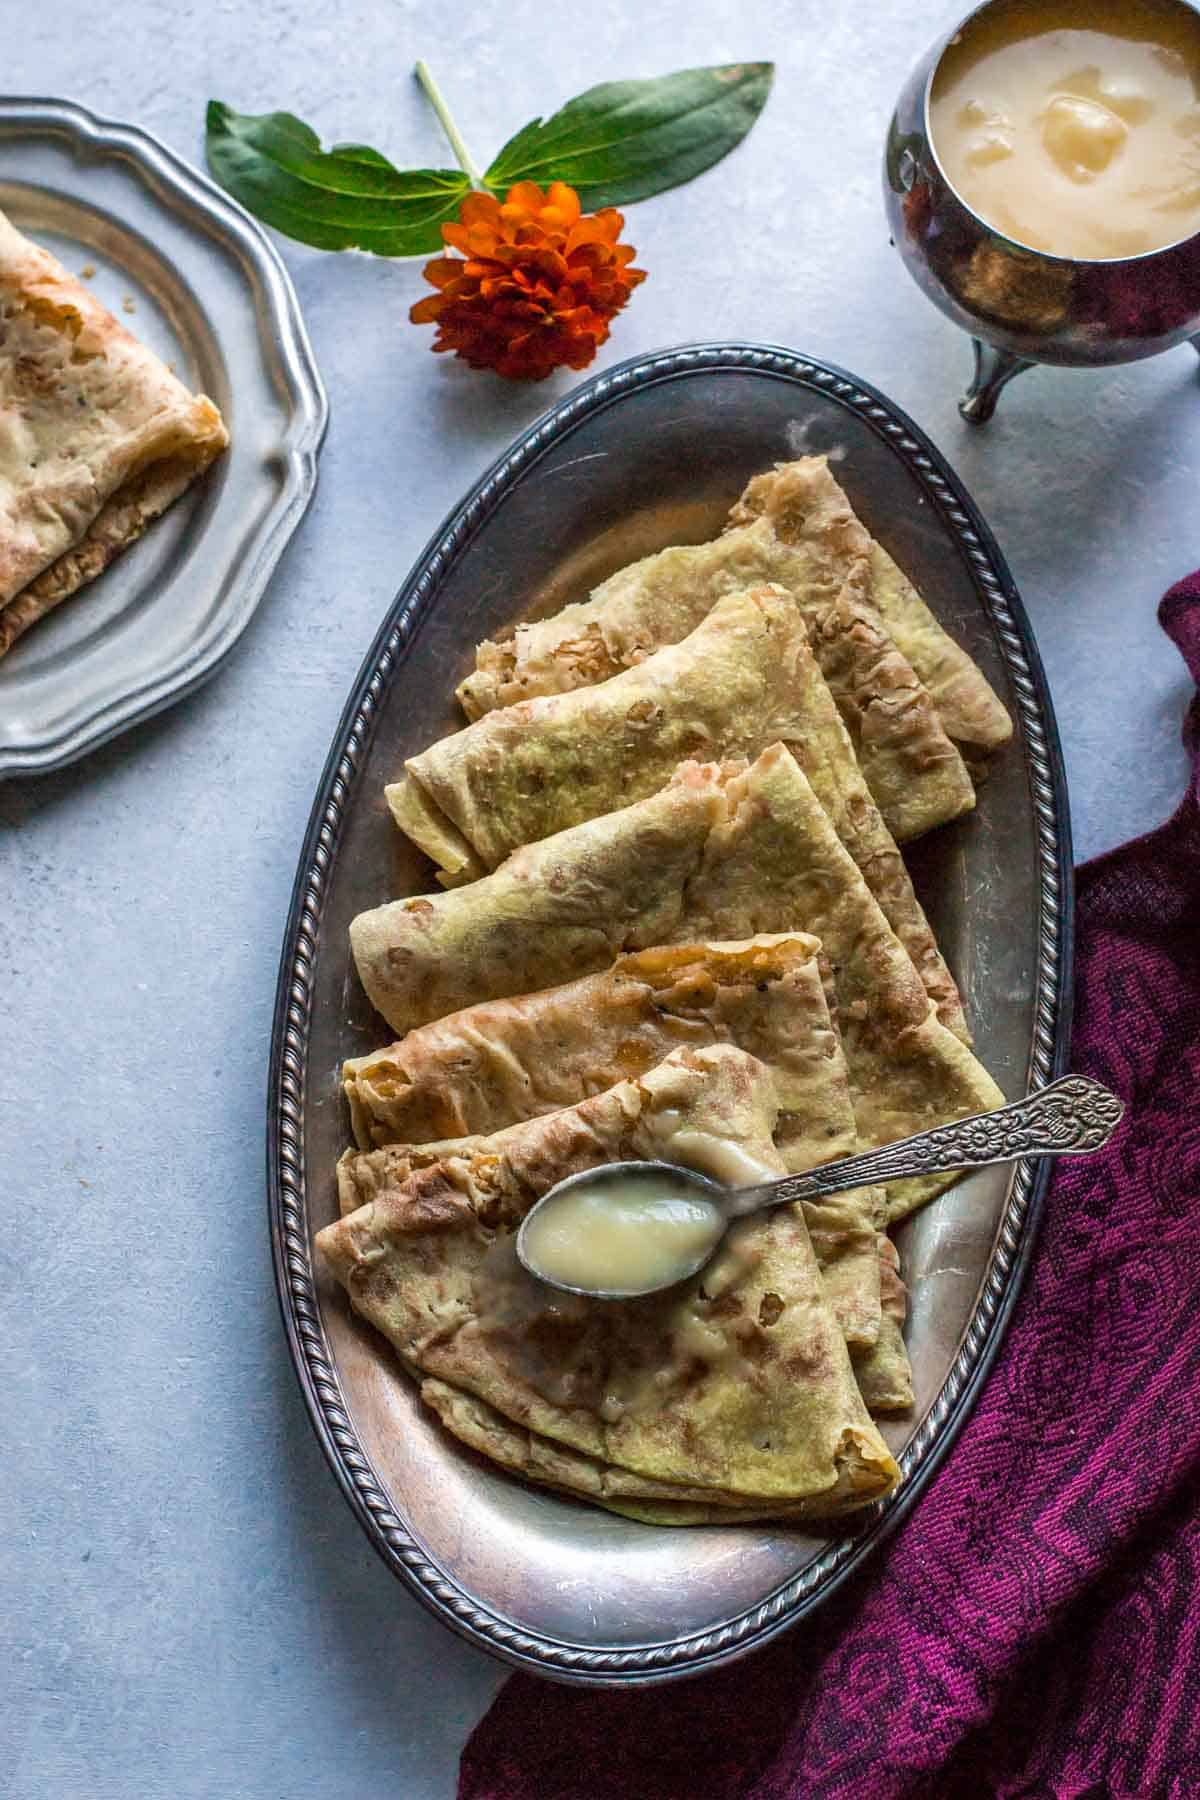 You'll never believe that making Puran Poli or Holige at home would be this simple. Make it today!